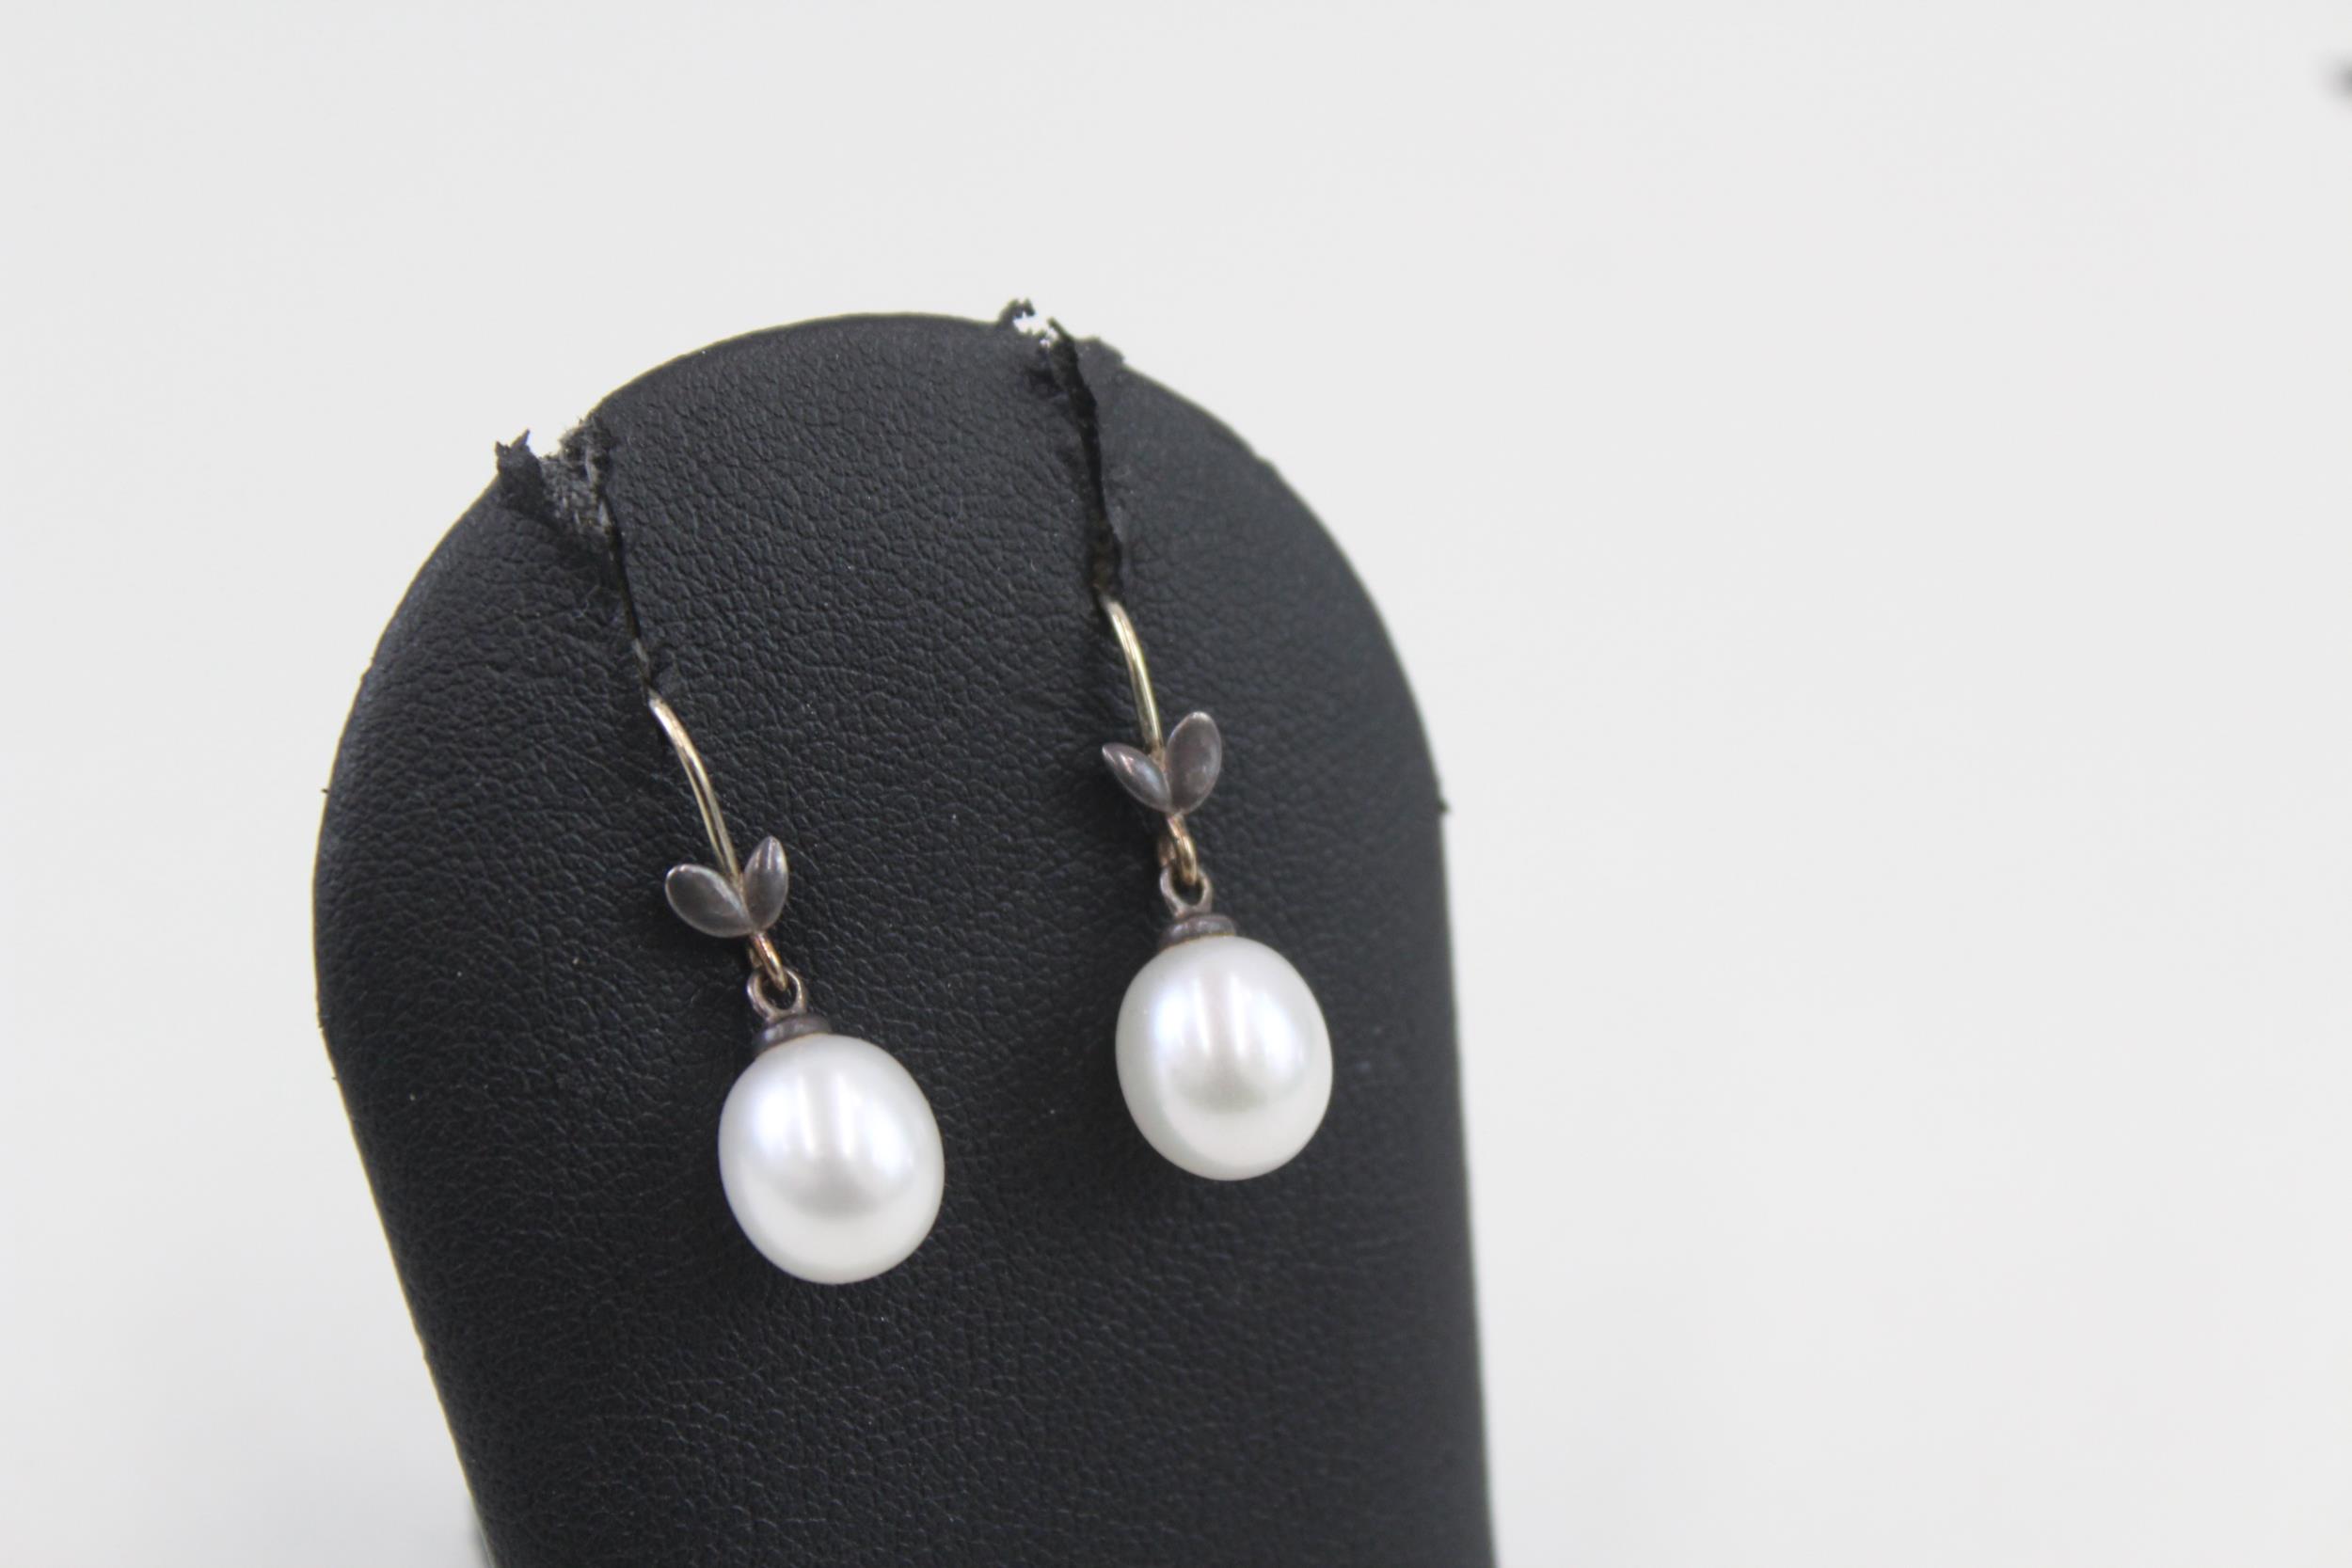 Pair of silver cultured pearl drop earrings by designer Tiffany & Co (3g) - Image 3 of 6